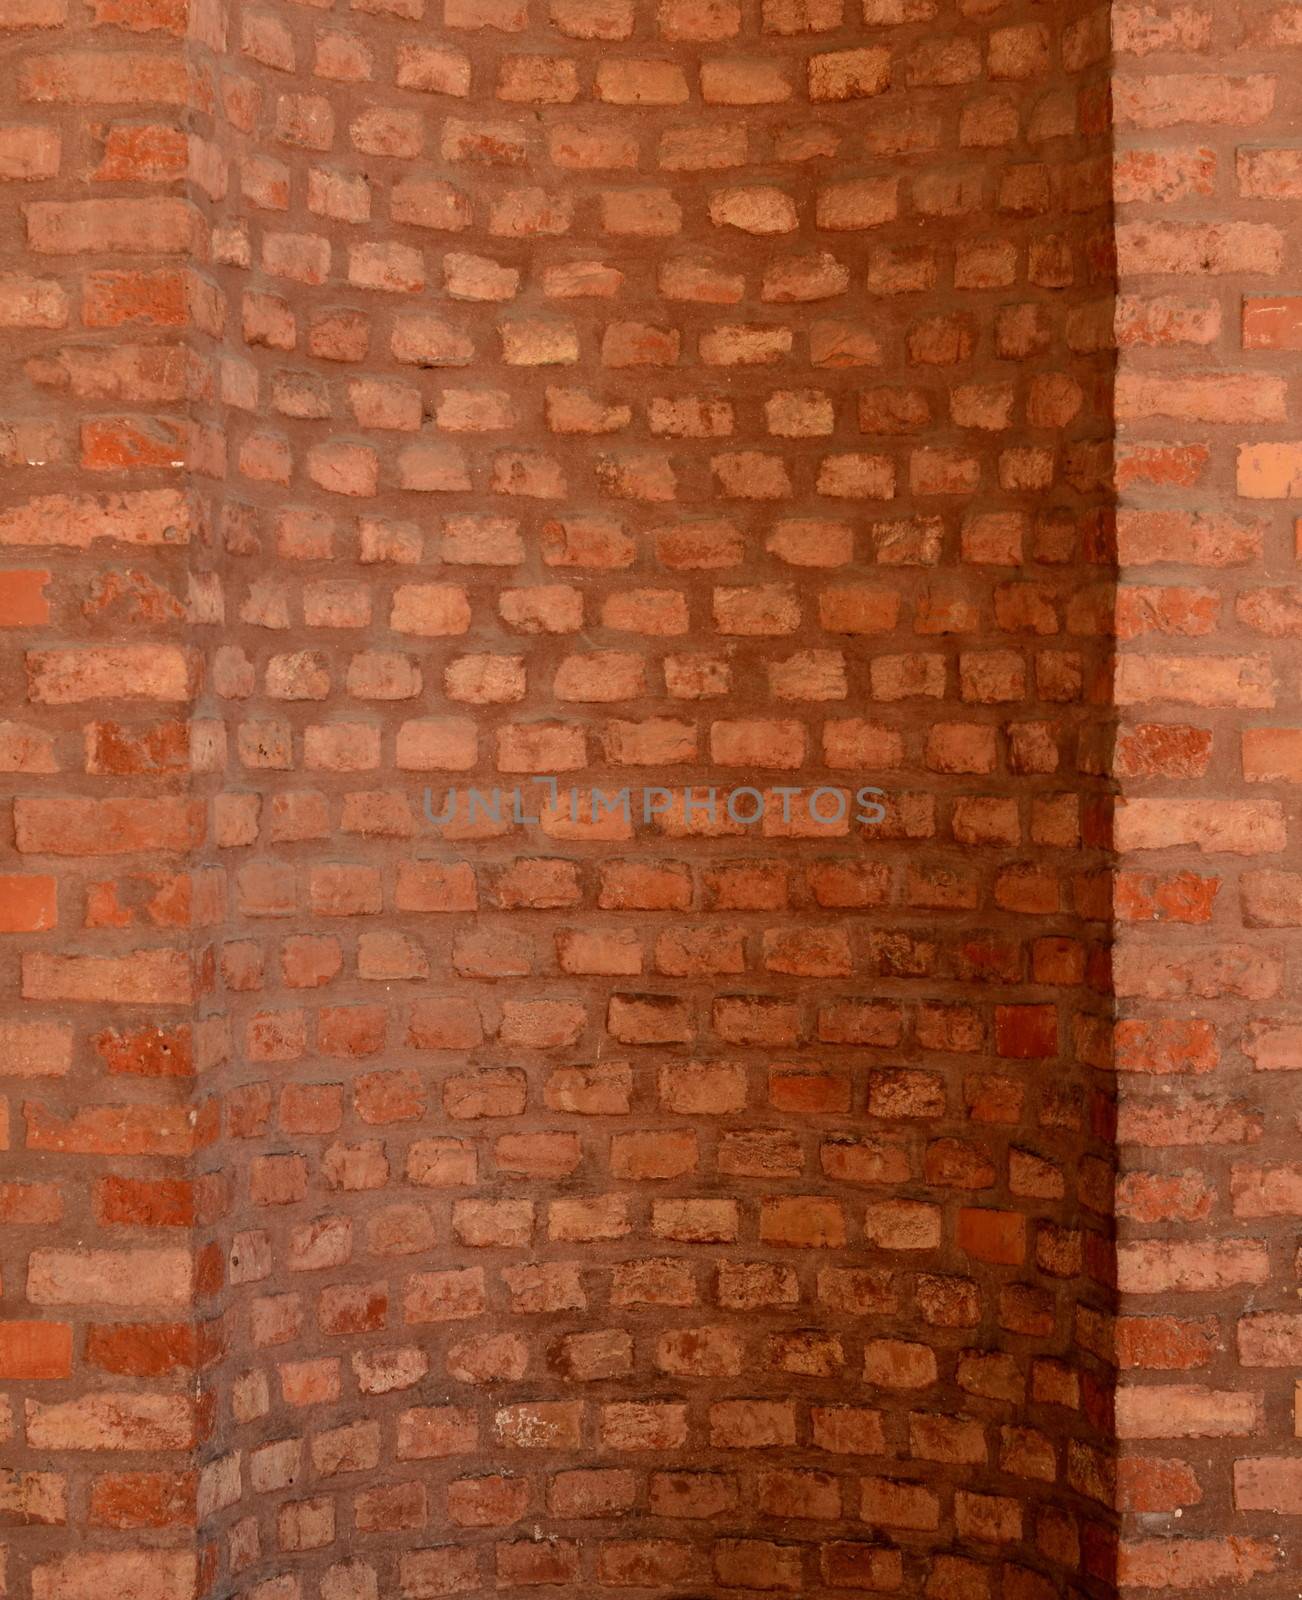 Architectural Feature Of A Curved Red Brick Wall For A Chimney